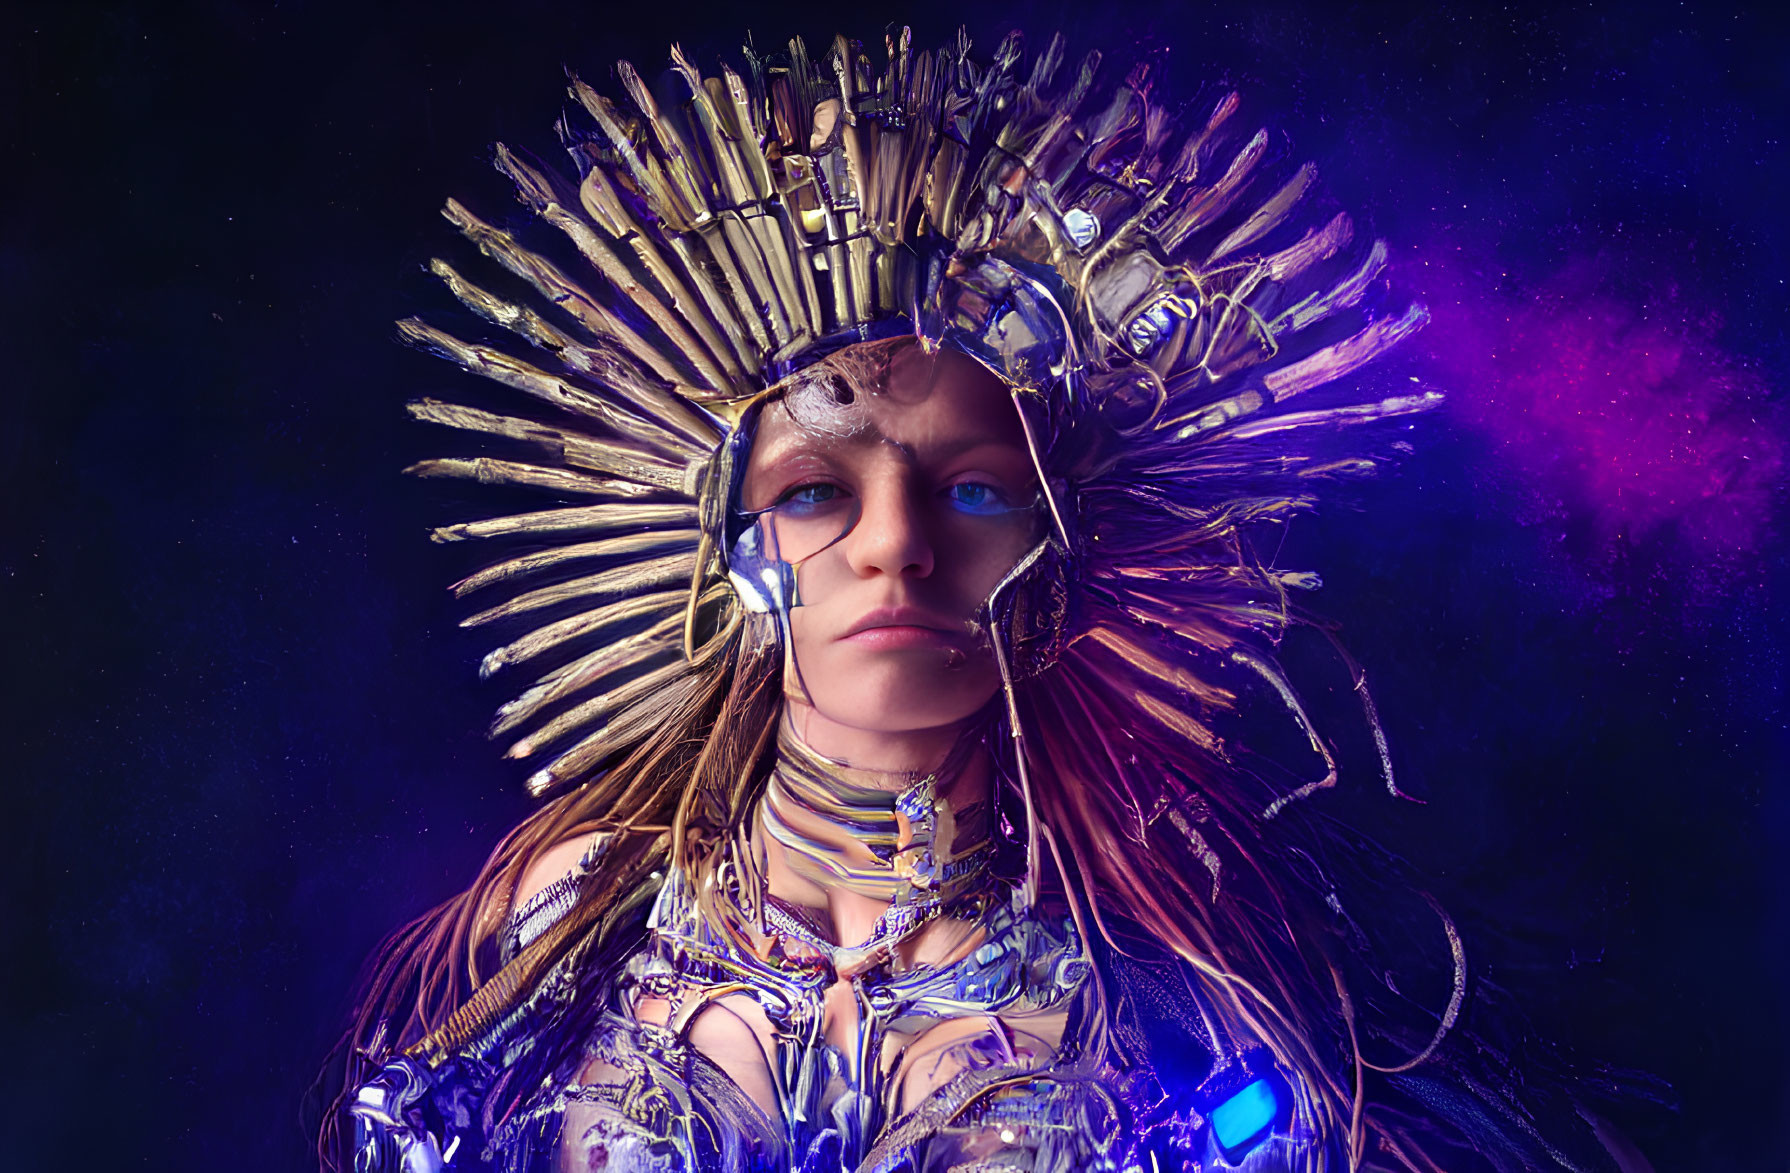 Futuristic headdress and armor on person against dark background